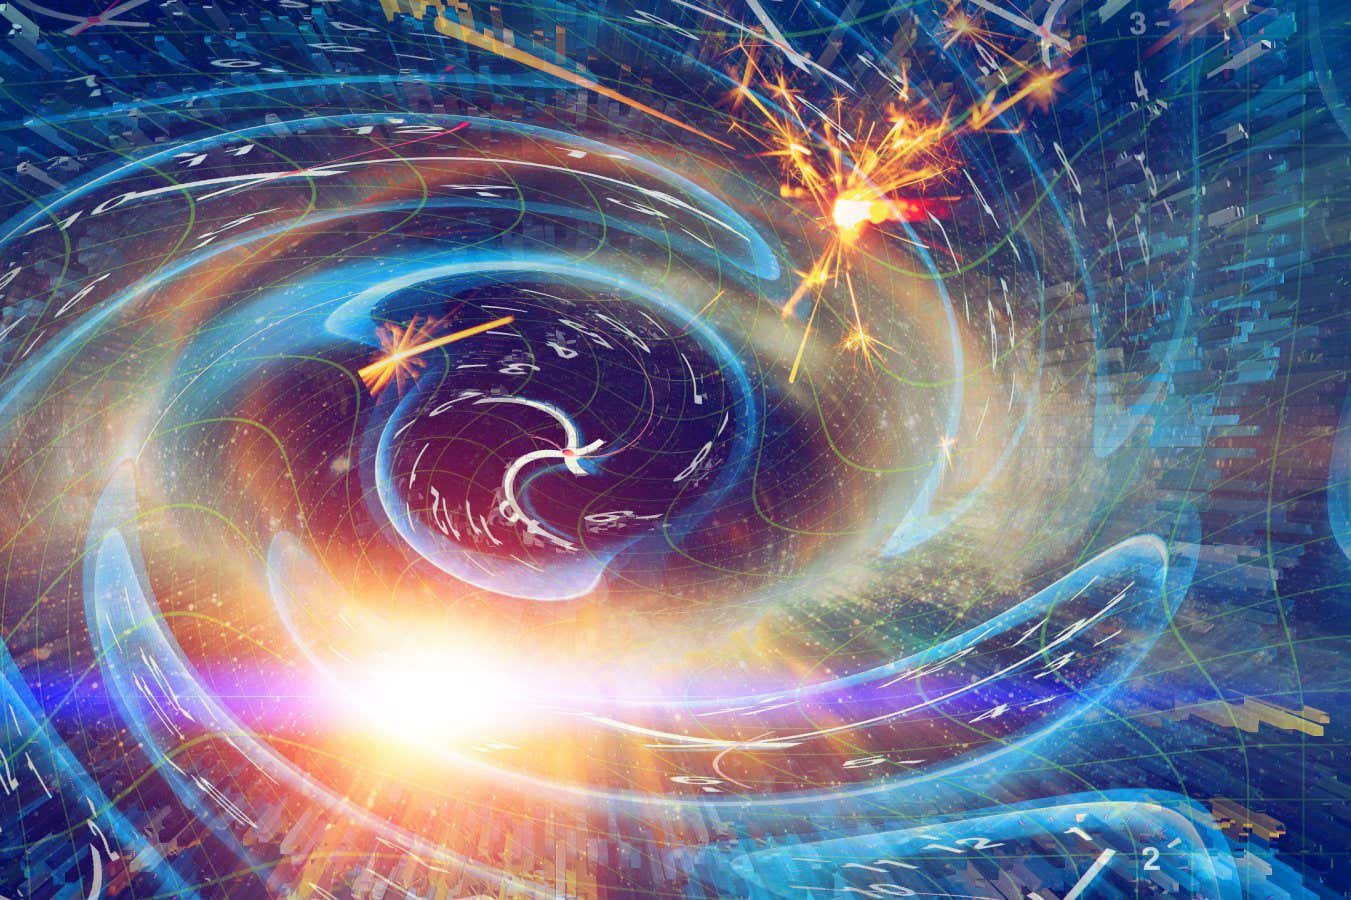 Time may be an illusion created by quantum entanglement